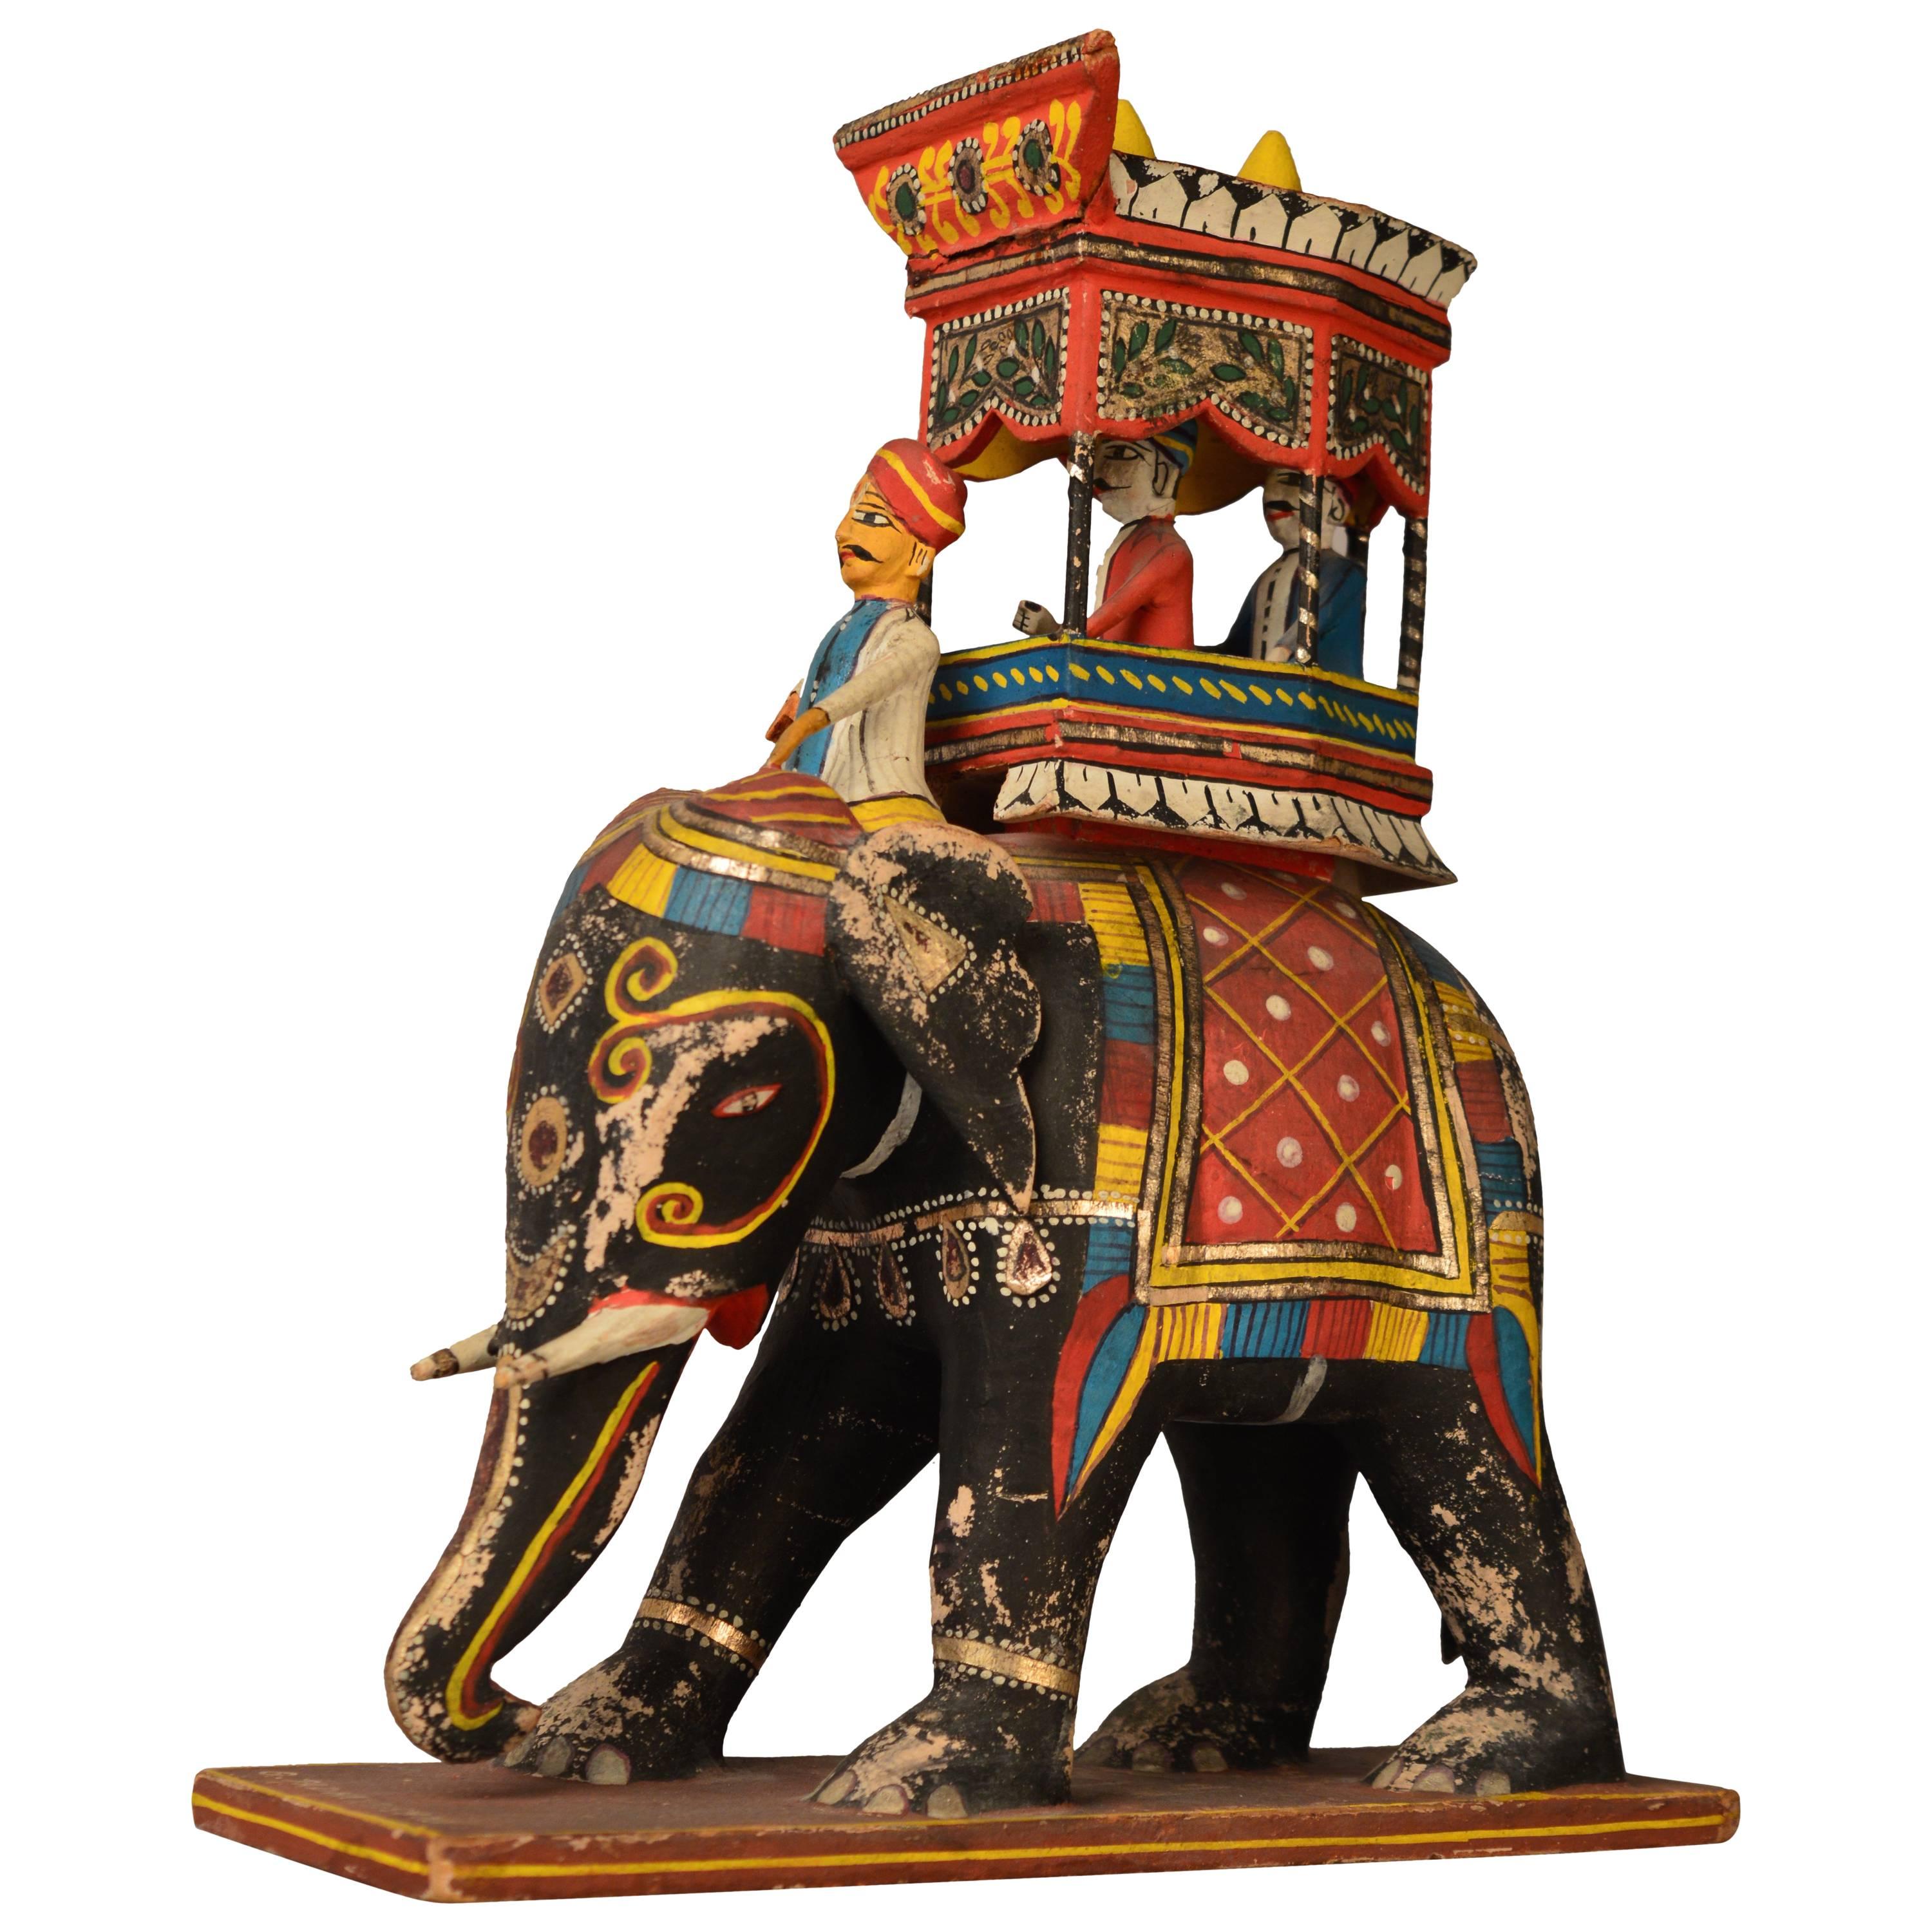 Carved Wood Statue, Toy of an Indian Elephant with Ambari, circa 1970